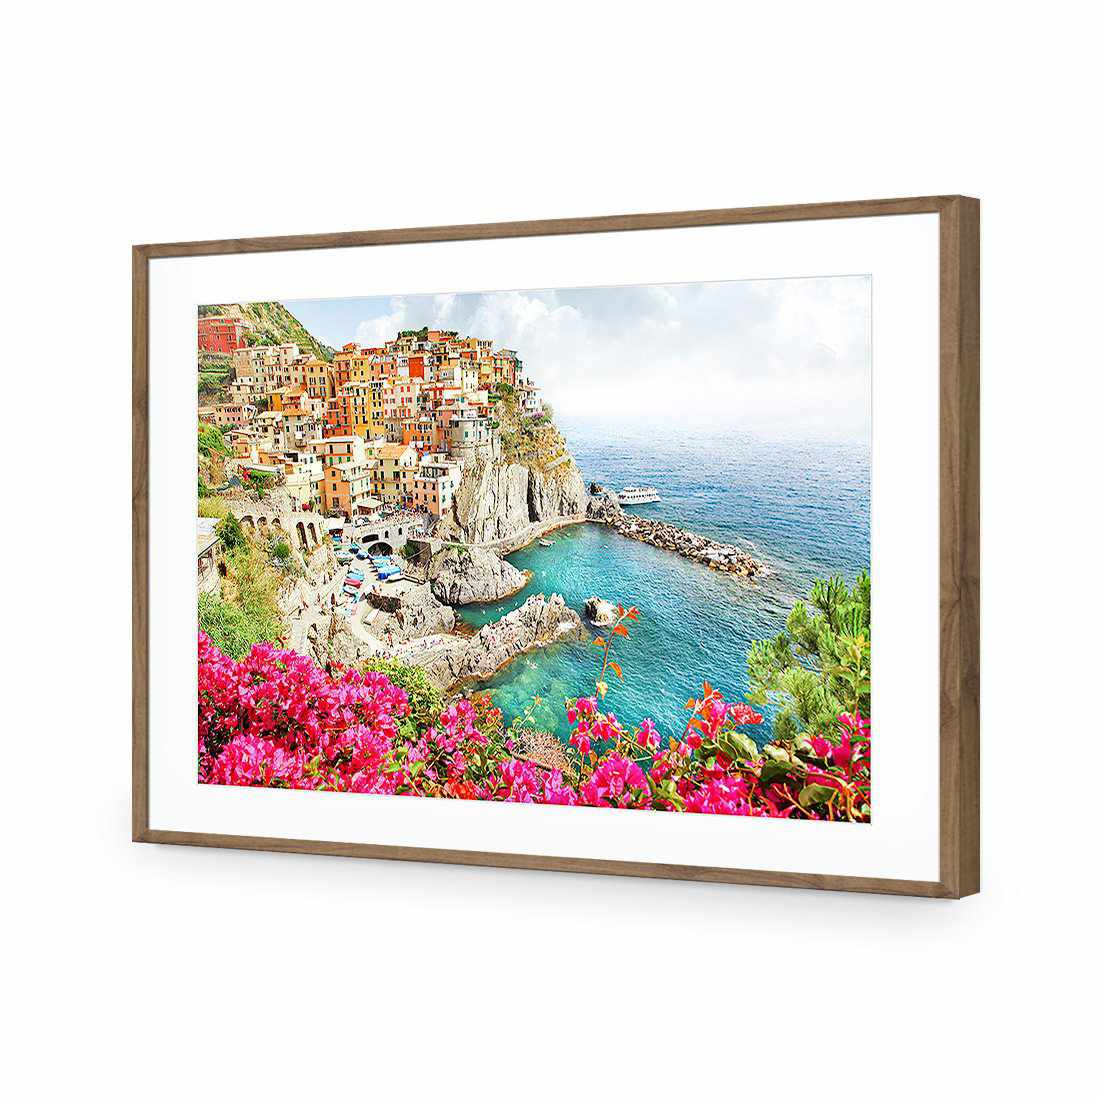 Cinque Terre in Italy-Acrylic-Wall Art Design-With Border-Acrylic - Natural Frame-45x30cm-Wall Art Designs